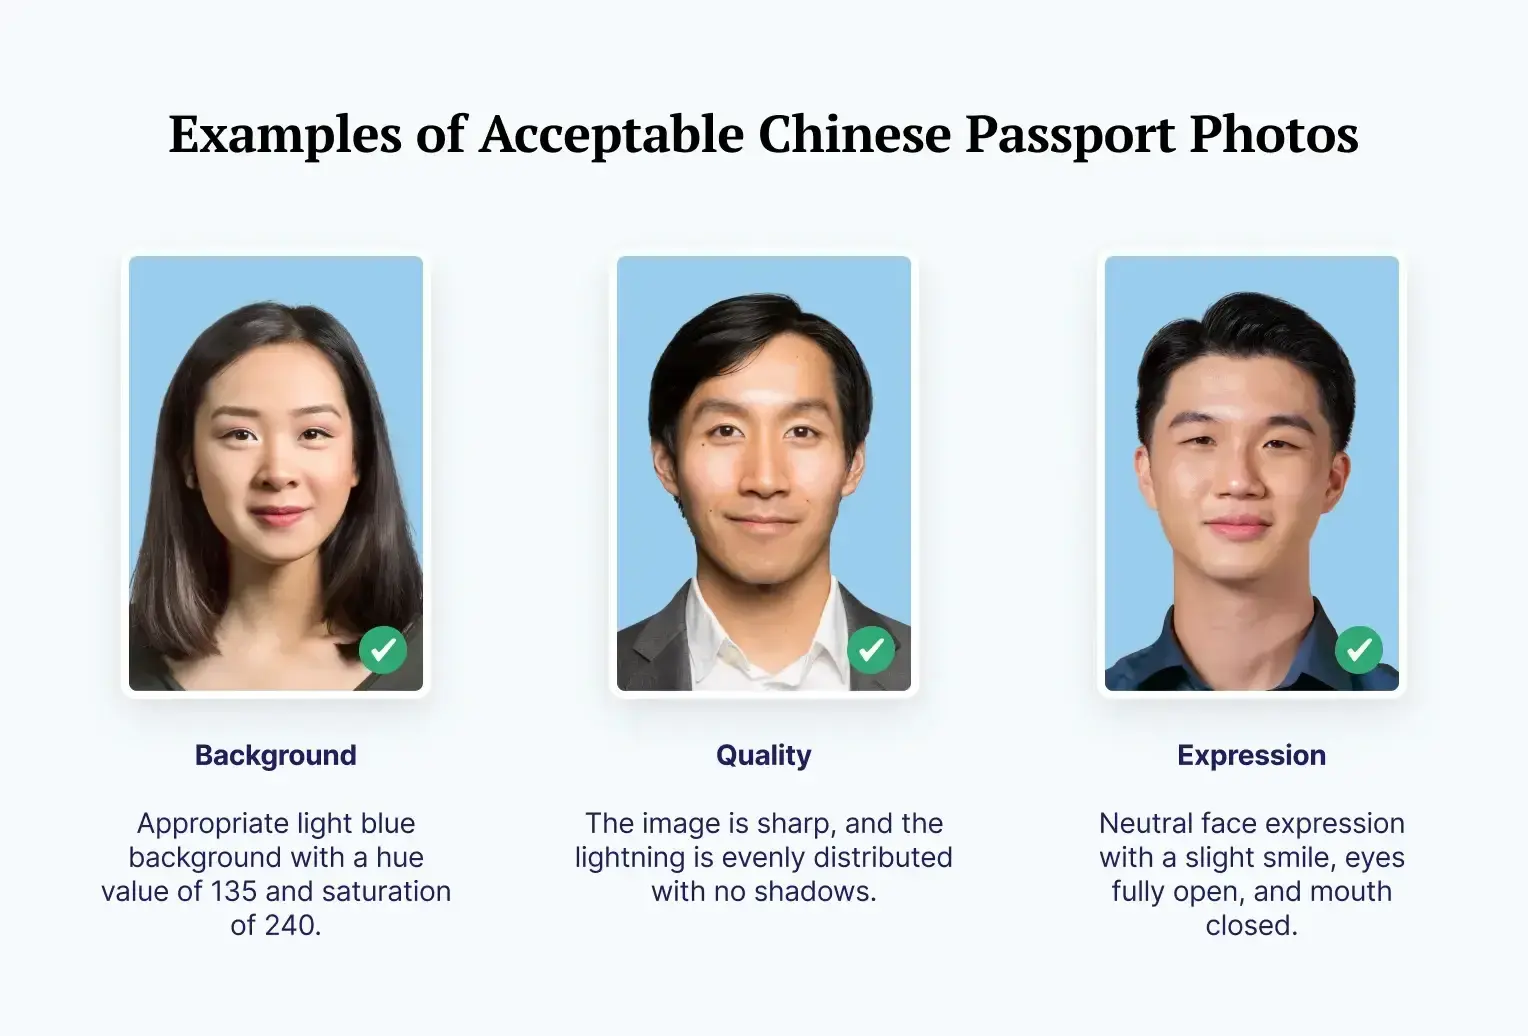 Examples of Acceptable Chinese Passport Photo.